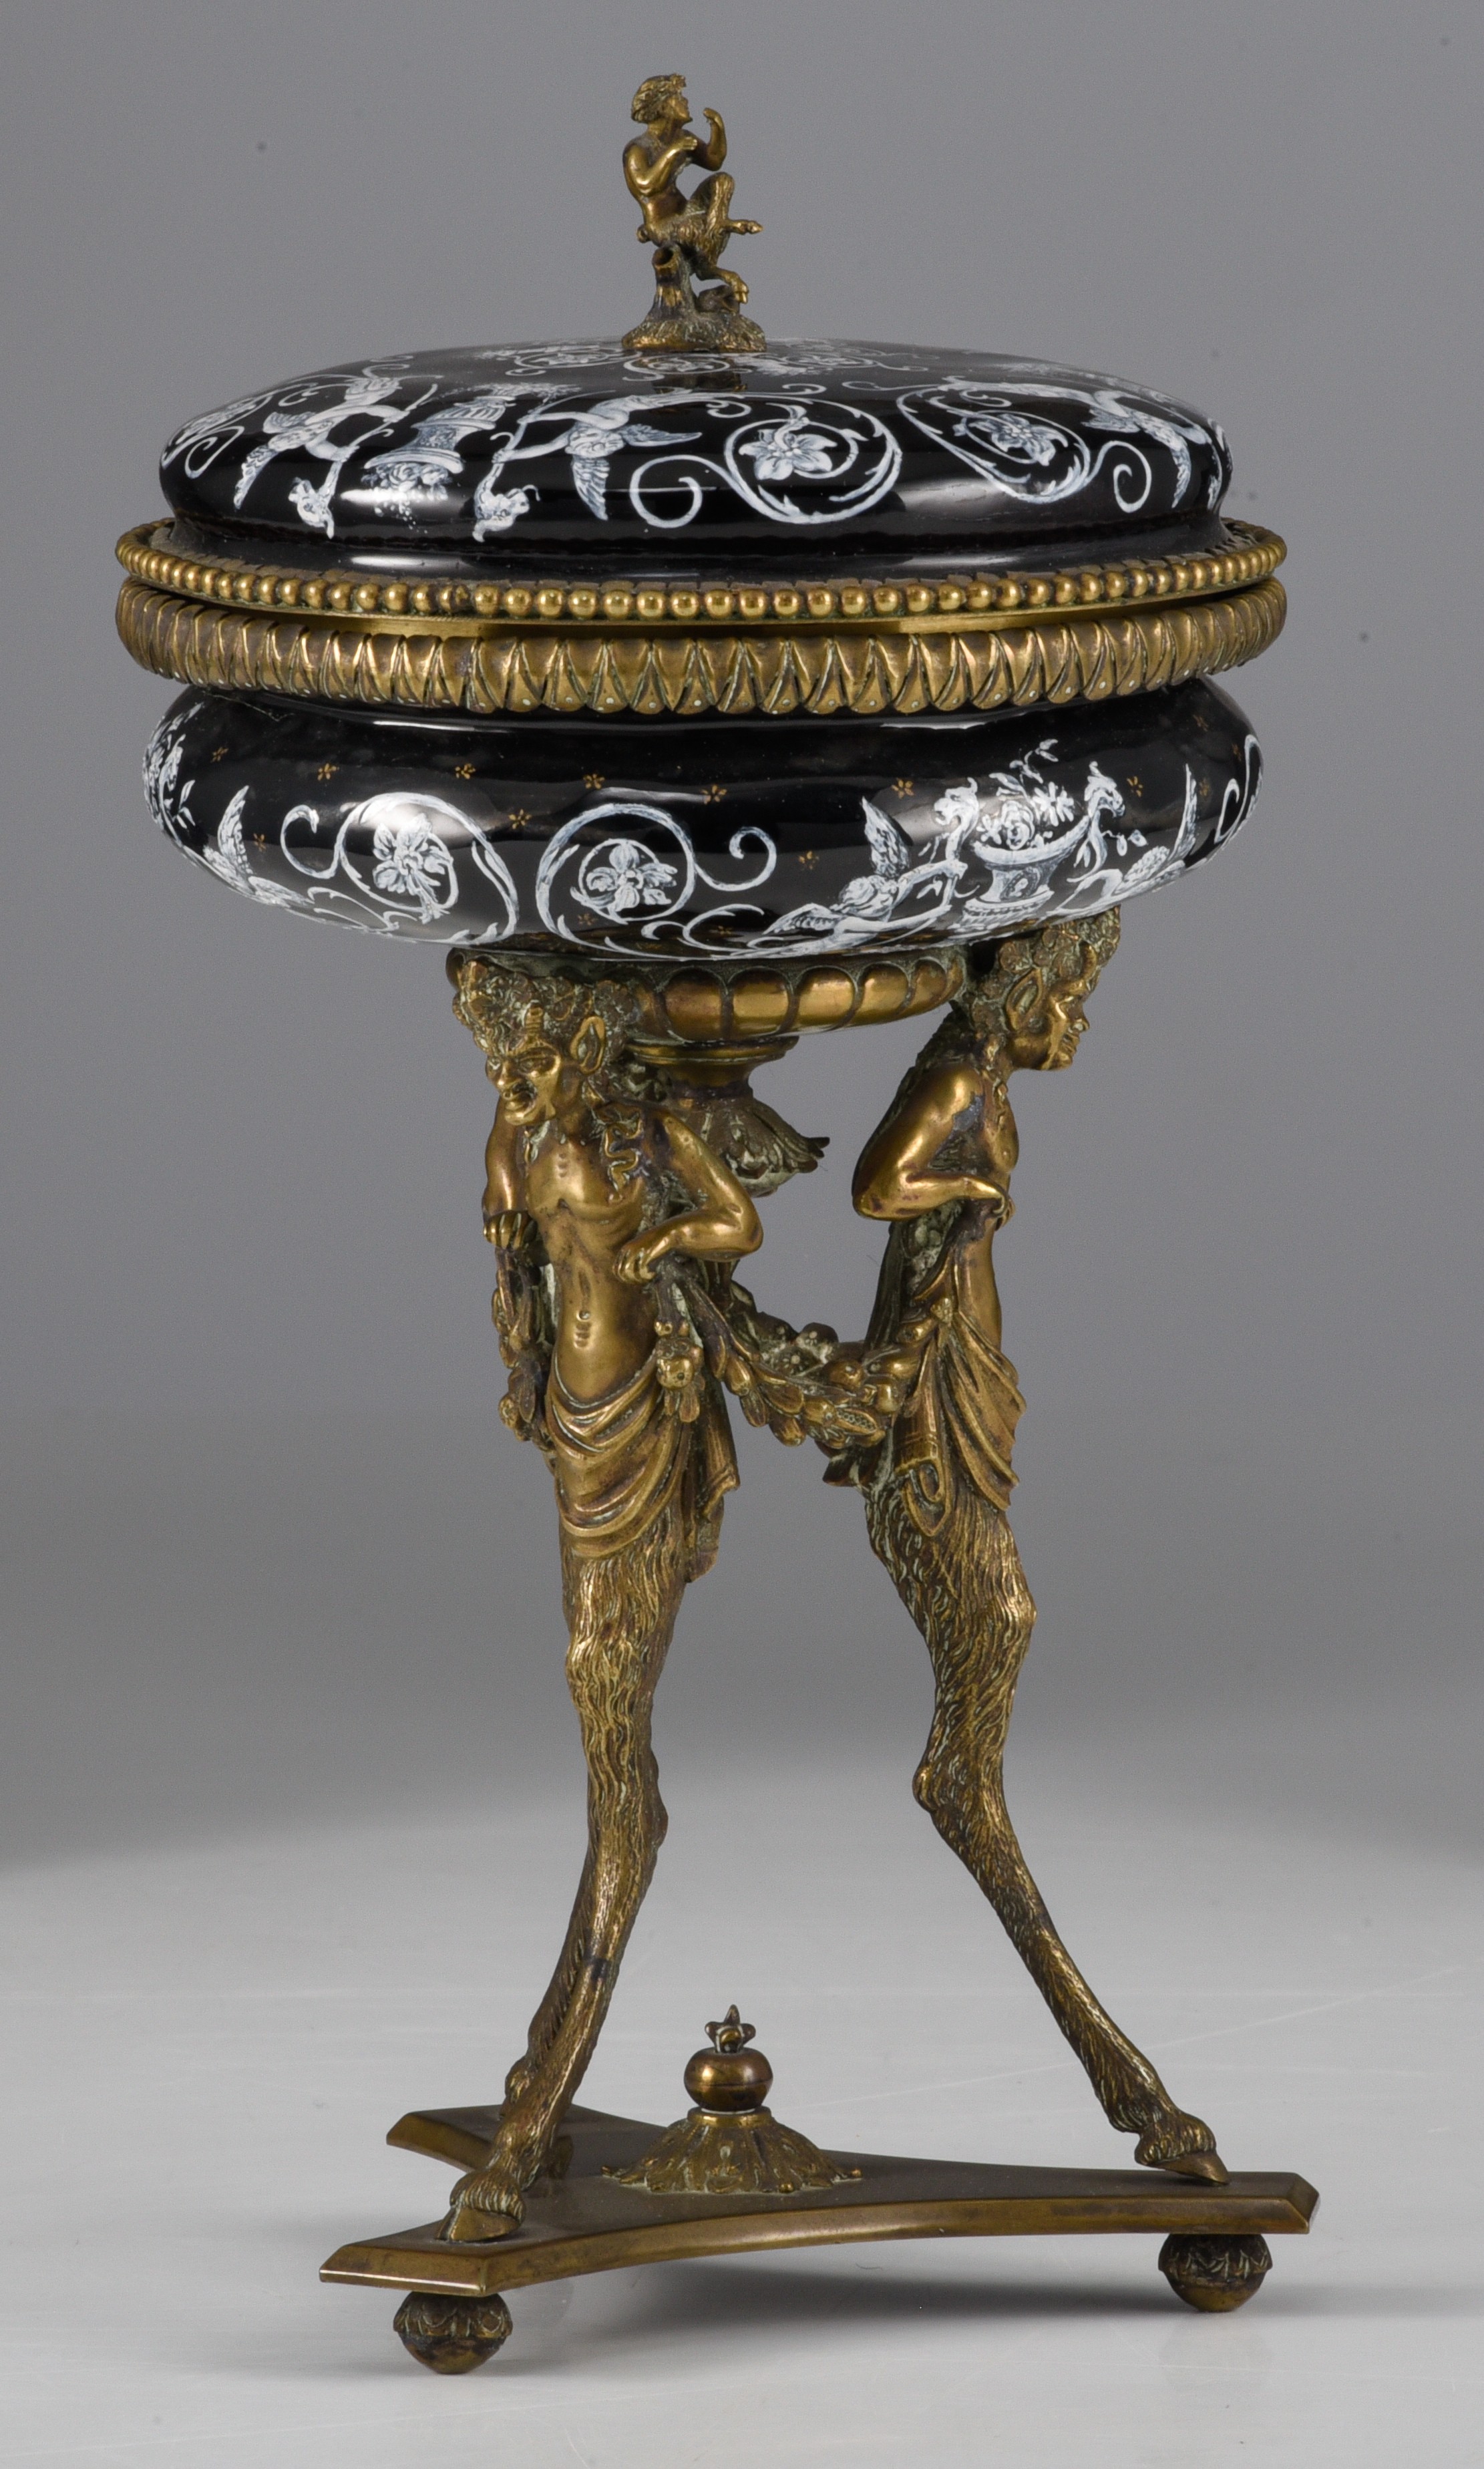 A Limoges enamel box with cover and a tazza with cover, Napoleon III period, H 8 - 23 cm - Image 13 of 16